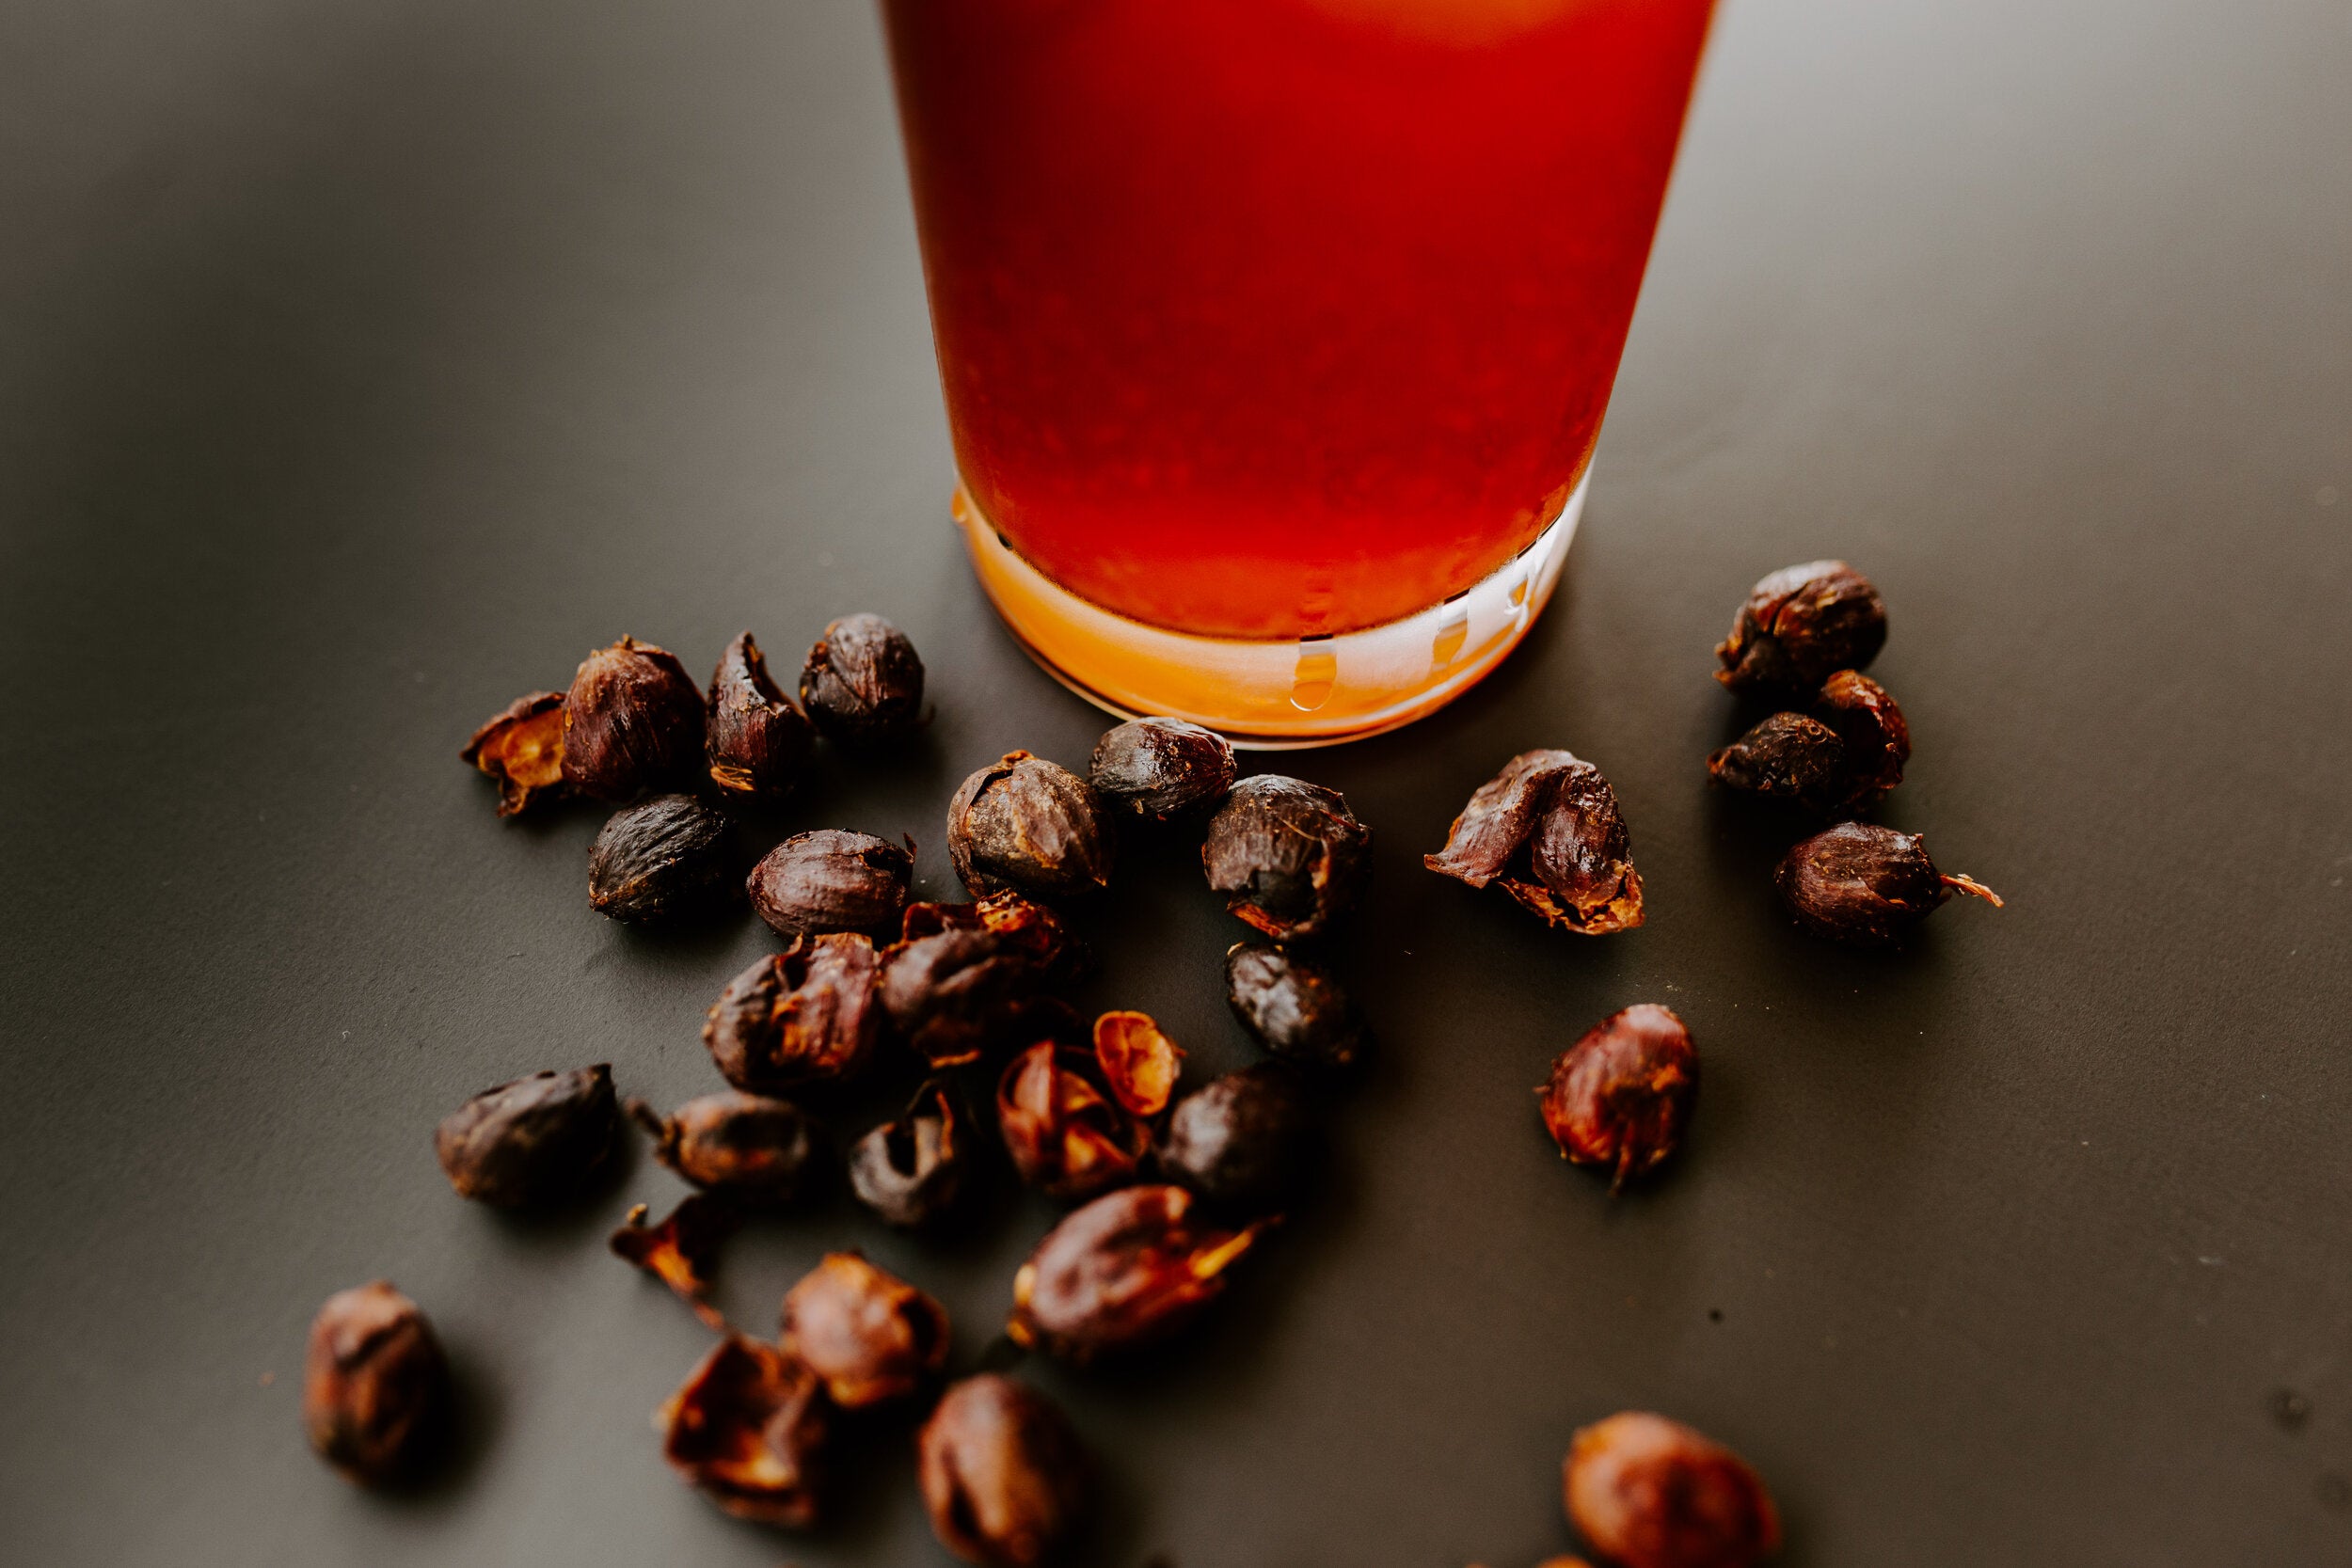 Cascara, which is Spanish for husk, has become a common name for tea brewed from coffee cherry husks. PHOTO: Ali Rowe